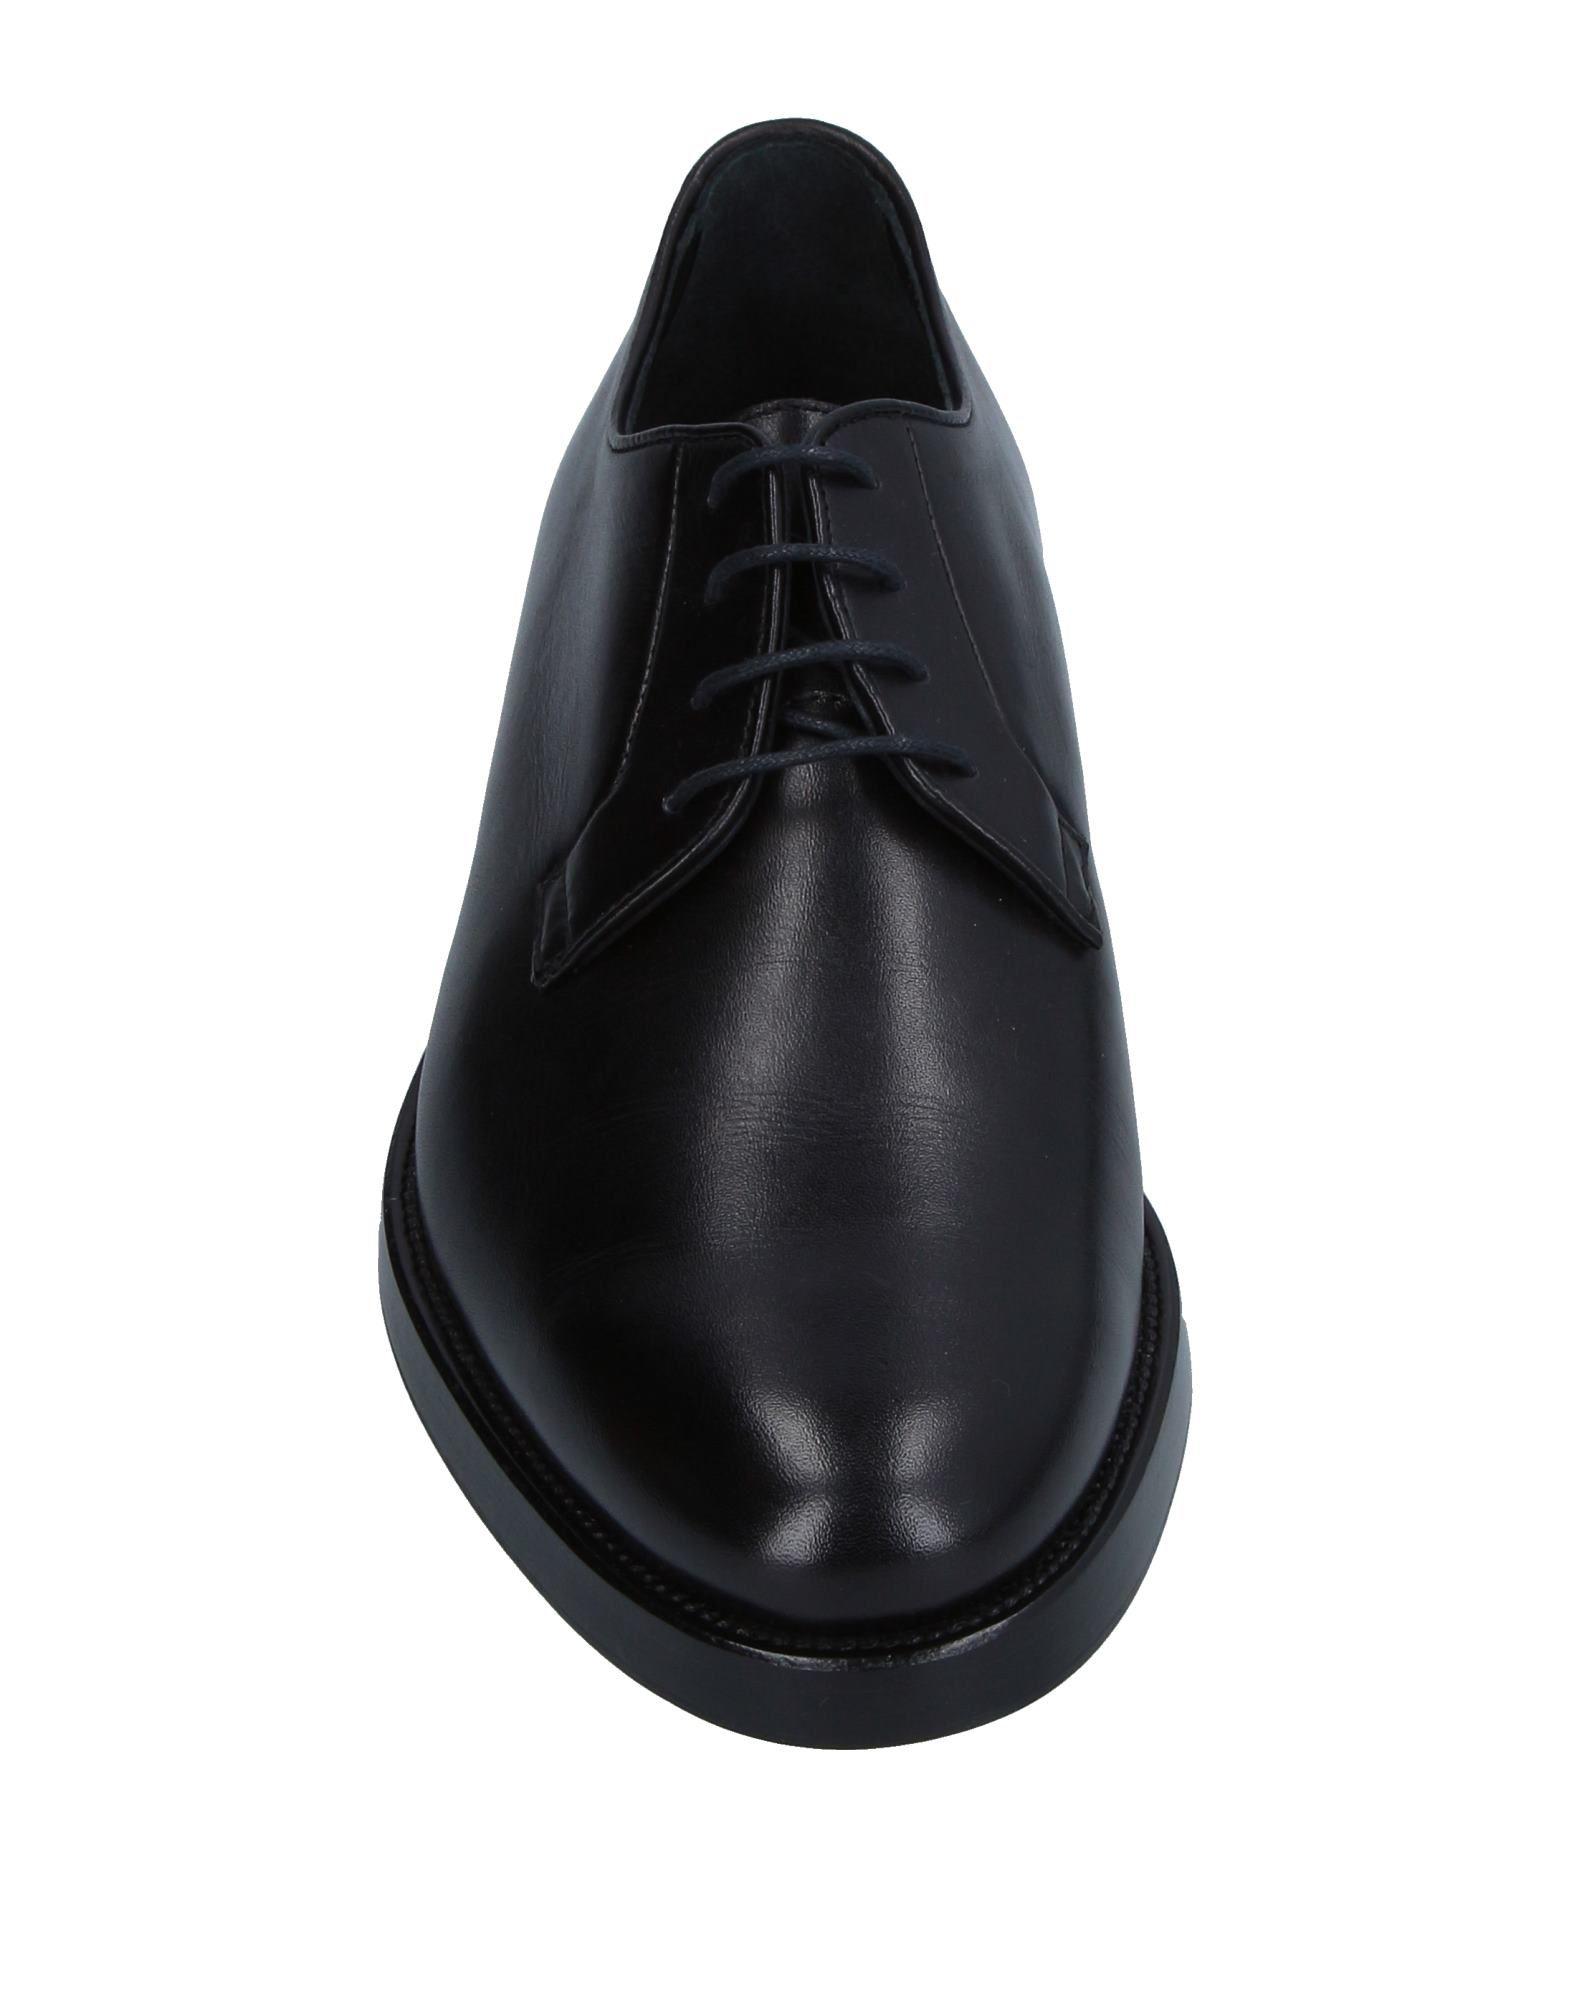 Mr. Hare Leather Lace-up Shoe in Black for Men - Lyst